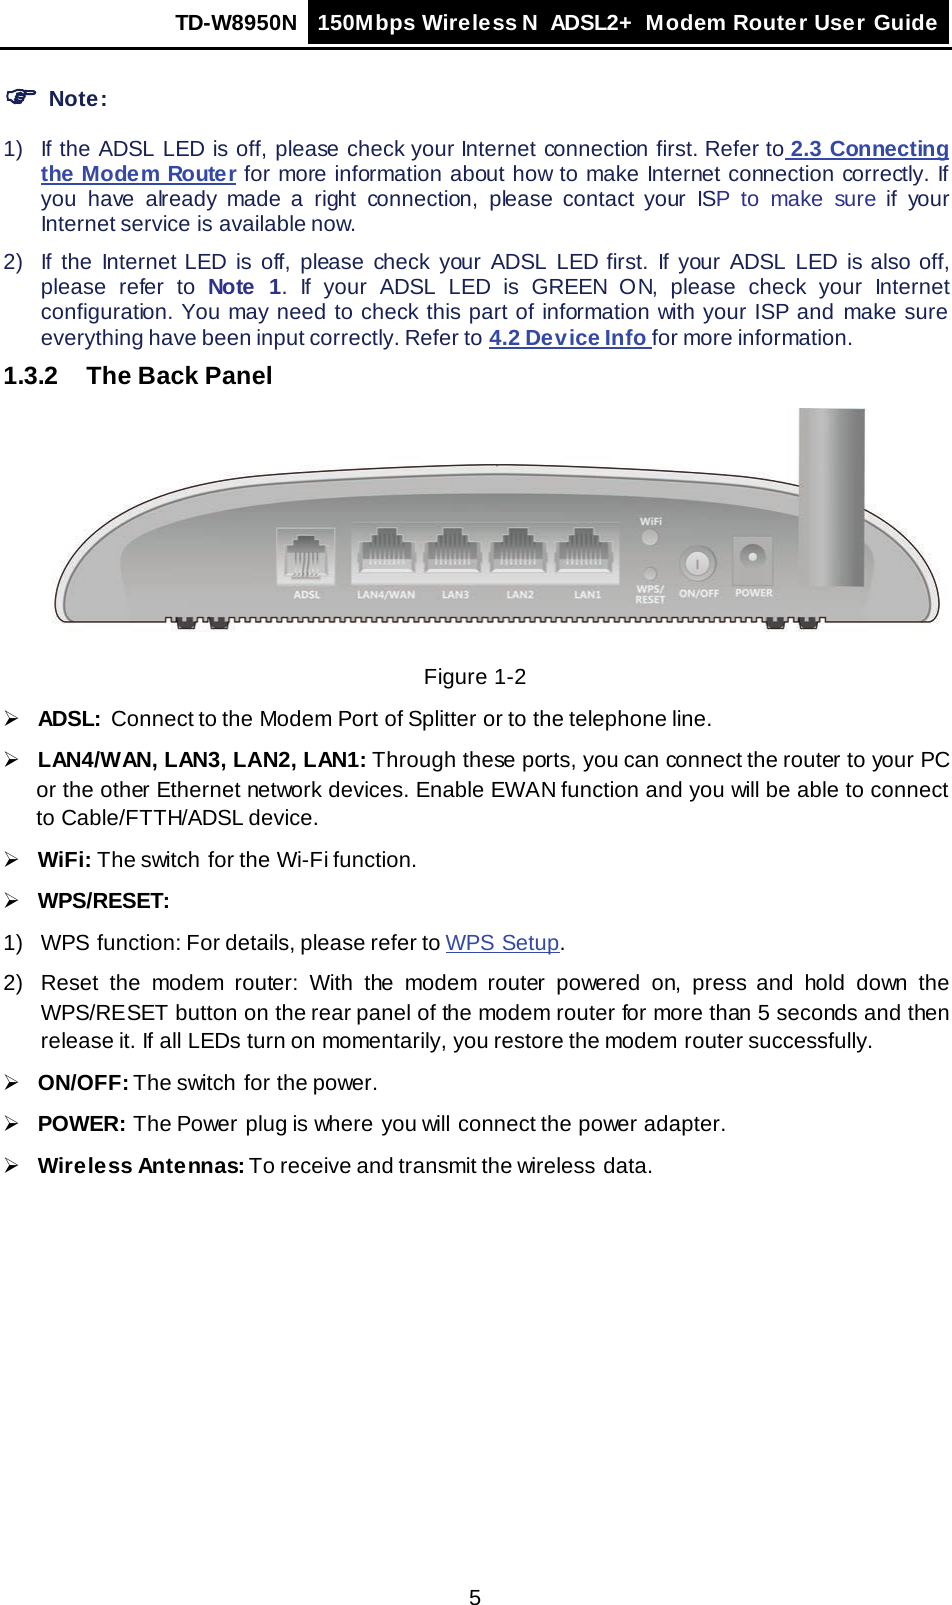 TD-W8950N 150Mbps Wireless N  ADSL2+ Modem Router User Guide  5  Note: 1) If the ADSL LED is off, please check your Internet connection first. Refer to 2.3 Connecting the Modem Router for more information about how to make Internet connection correctly. If you have already made a right connection, please contact your ISP to make sure if your Internet service is available now. 2) If the Internet LED is off, please check your ADSL LED first. If your ADSL LED is also off, please refer to Note  1. If your ADSL LED is GREEN ON, please check your Internet configuration. You may need to check this part of information with your ISP and make sure everything have been input correctly. Refer to 4.2 Device Info for more information. 1.3.2 The Back Panel  Figure 1-2  ADSL:  Connect to the Modem Port of Splitter or to the telephone line.  LAN4/WAN, LAN3, LAN2, LAN1: Through these ports, you can connect the router to your PC or the other Ethernet network devices. Enable EWAN function and you will be able to connect to Cable/FTTH/ADSL device.  WiFi: The switch for the Wi-Fi function.  WPS/RESET:   1) WPS function: For details, please refer to WPS Setup. 2) Reset the modem router: With the modem router powered on, press and hold down the WPS/RESET button on the rear panel of the modem router for more than 5 seconds and then release it. If all LEDs turn on momentarily, you restore the modem  router successfully.  ON/OFF: The switch  for the power.  POWER: The Power plug is where  you will connect the power adapter.  Wireless Antennas: To receive and transmit the wireless data. 